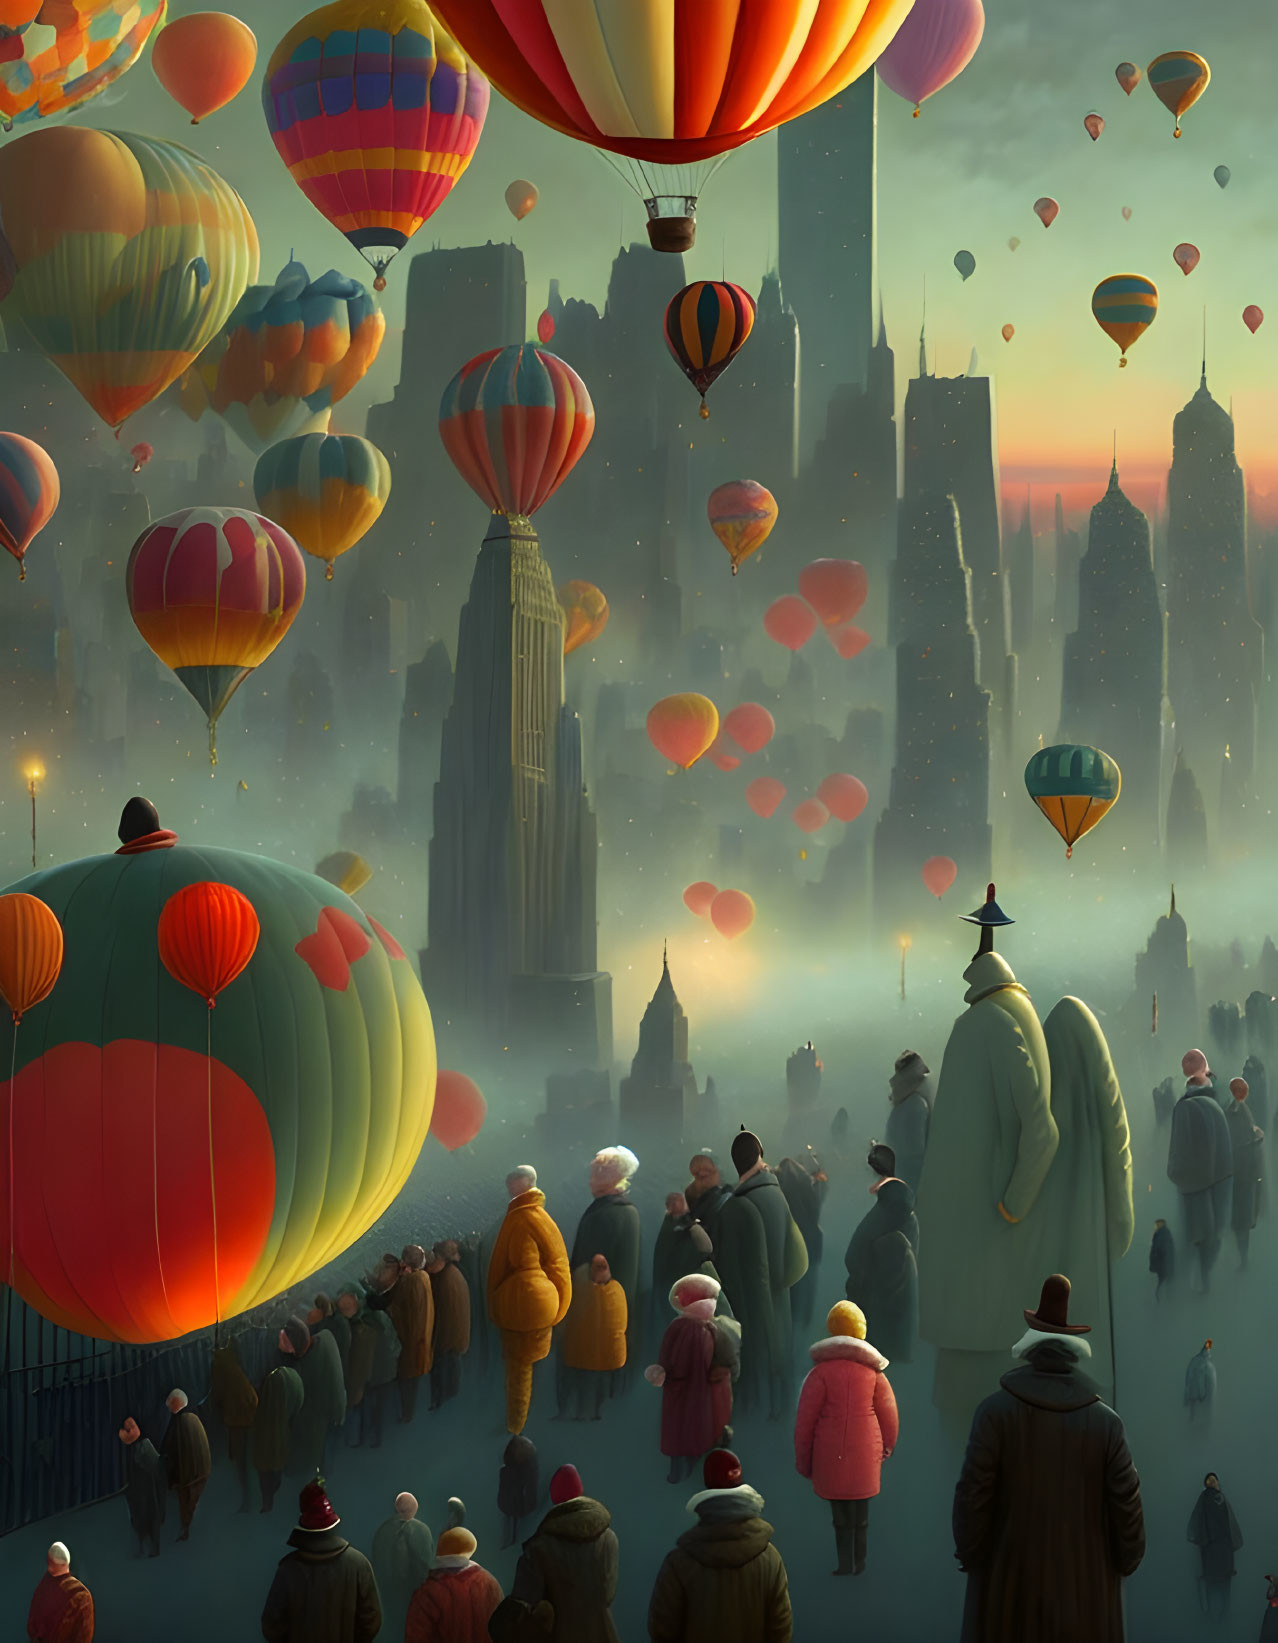 Crowd watching colorful hot air balloons over misty cityscape